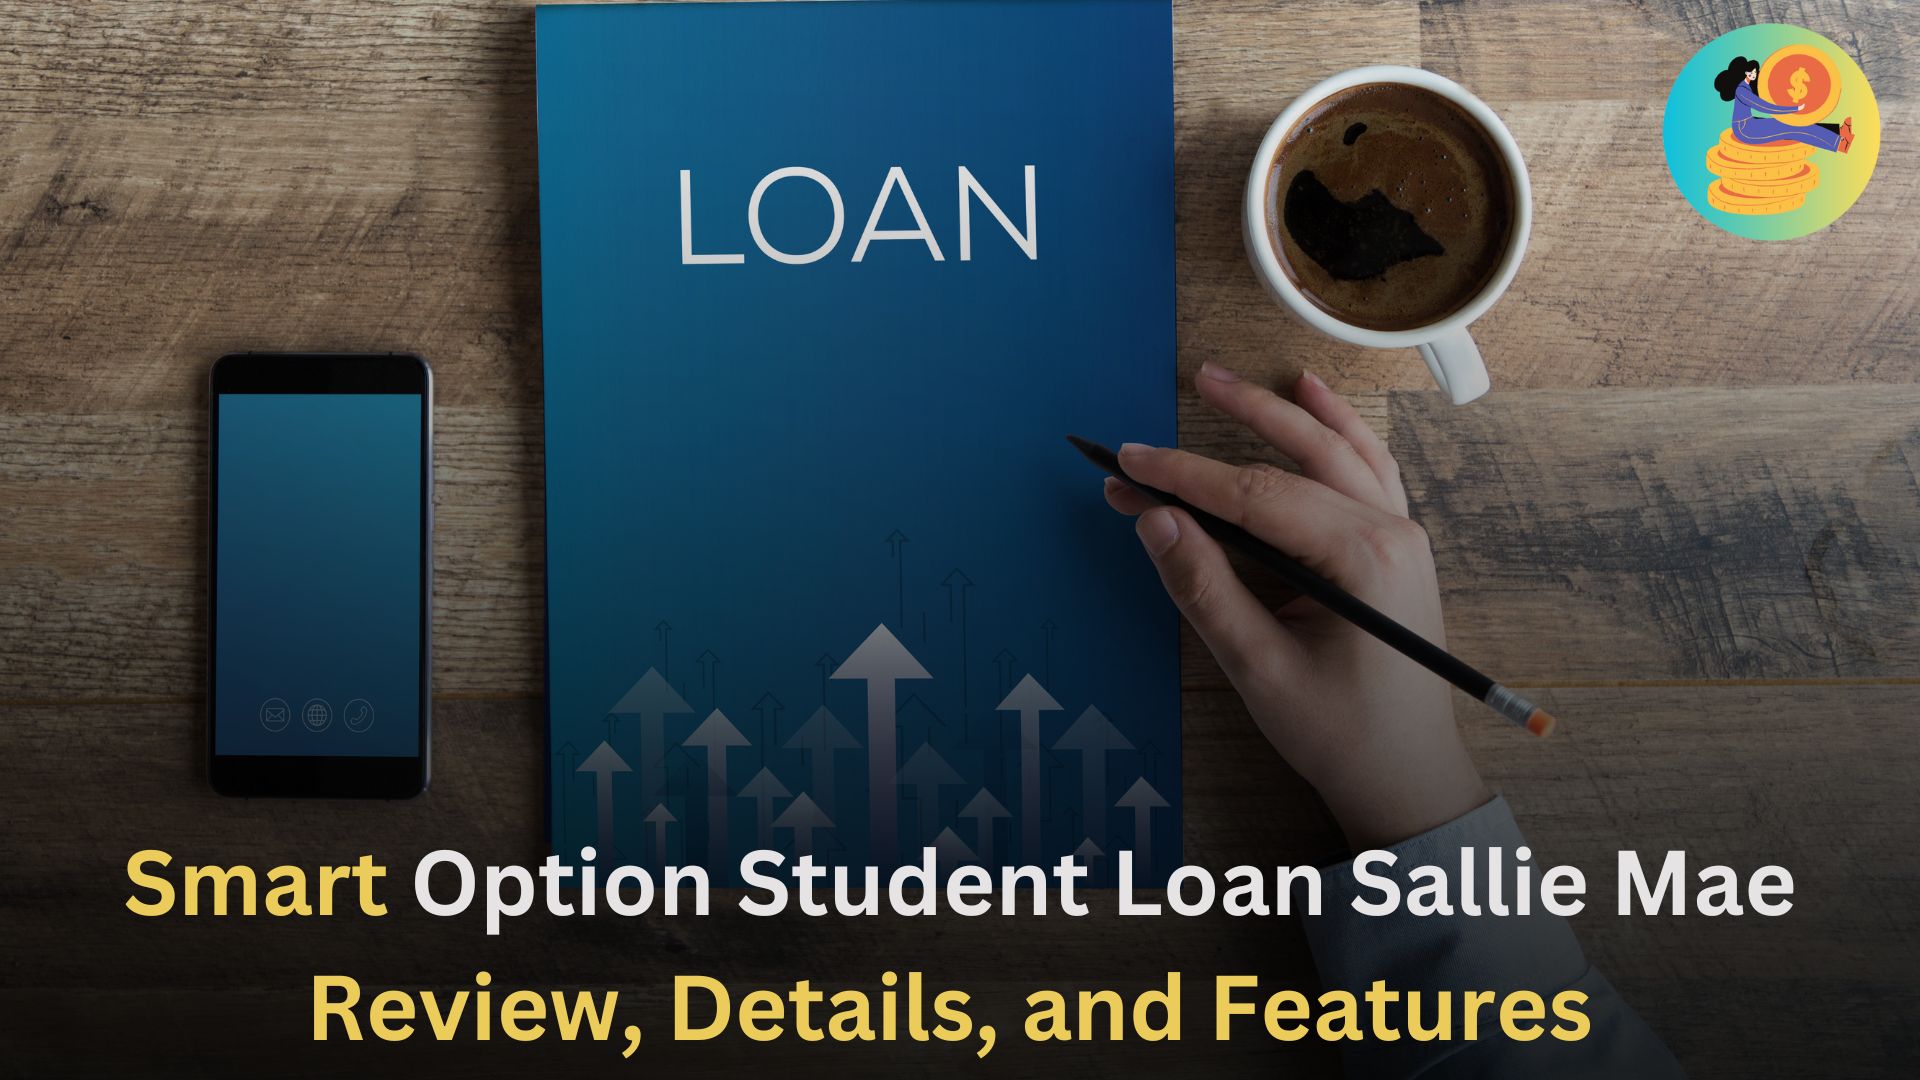 Smart Option Student Loan Sallie Mae Review, Details, and Features 